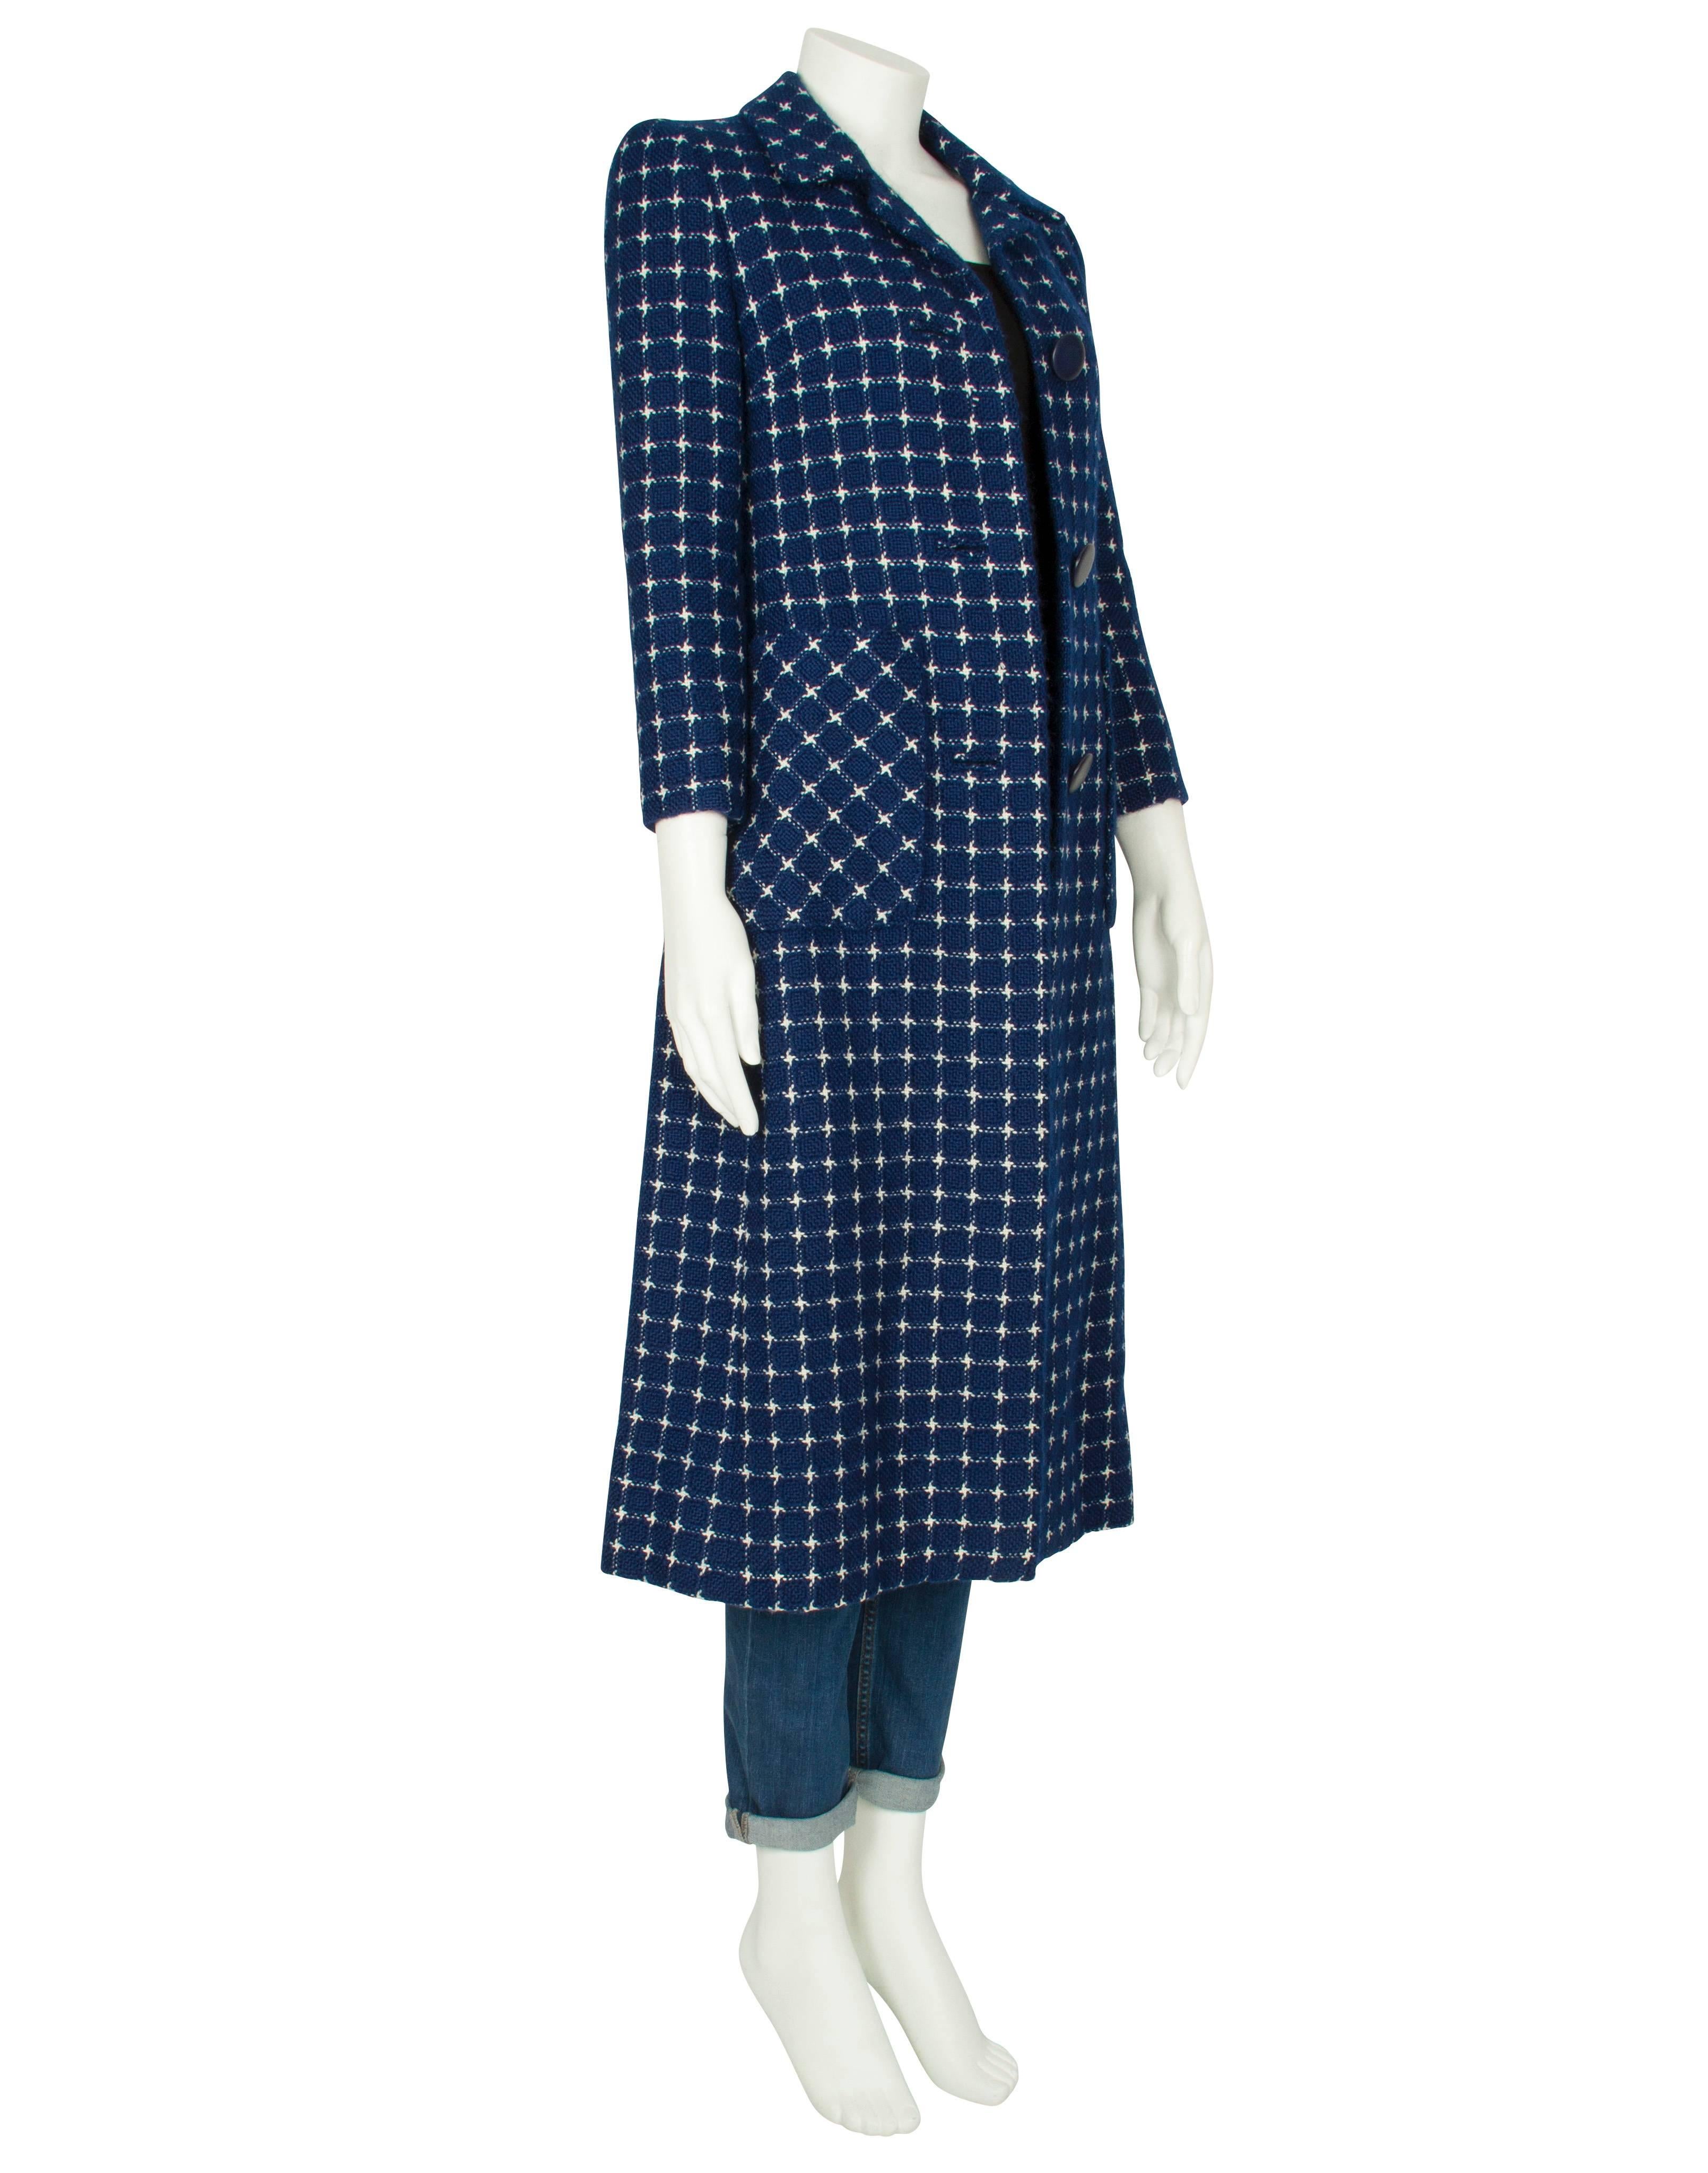 A short-sleeved ivory silk day dress by London society couturier Harald which features an all-over navy blue checked print and oversized navy blue buttons. The soft, lightweight dress is straight cut to the waist and features a round neckline with a